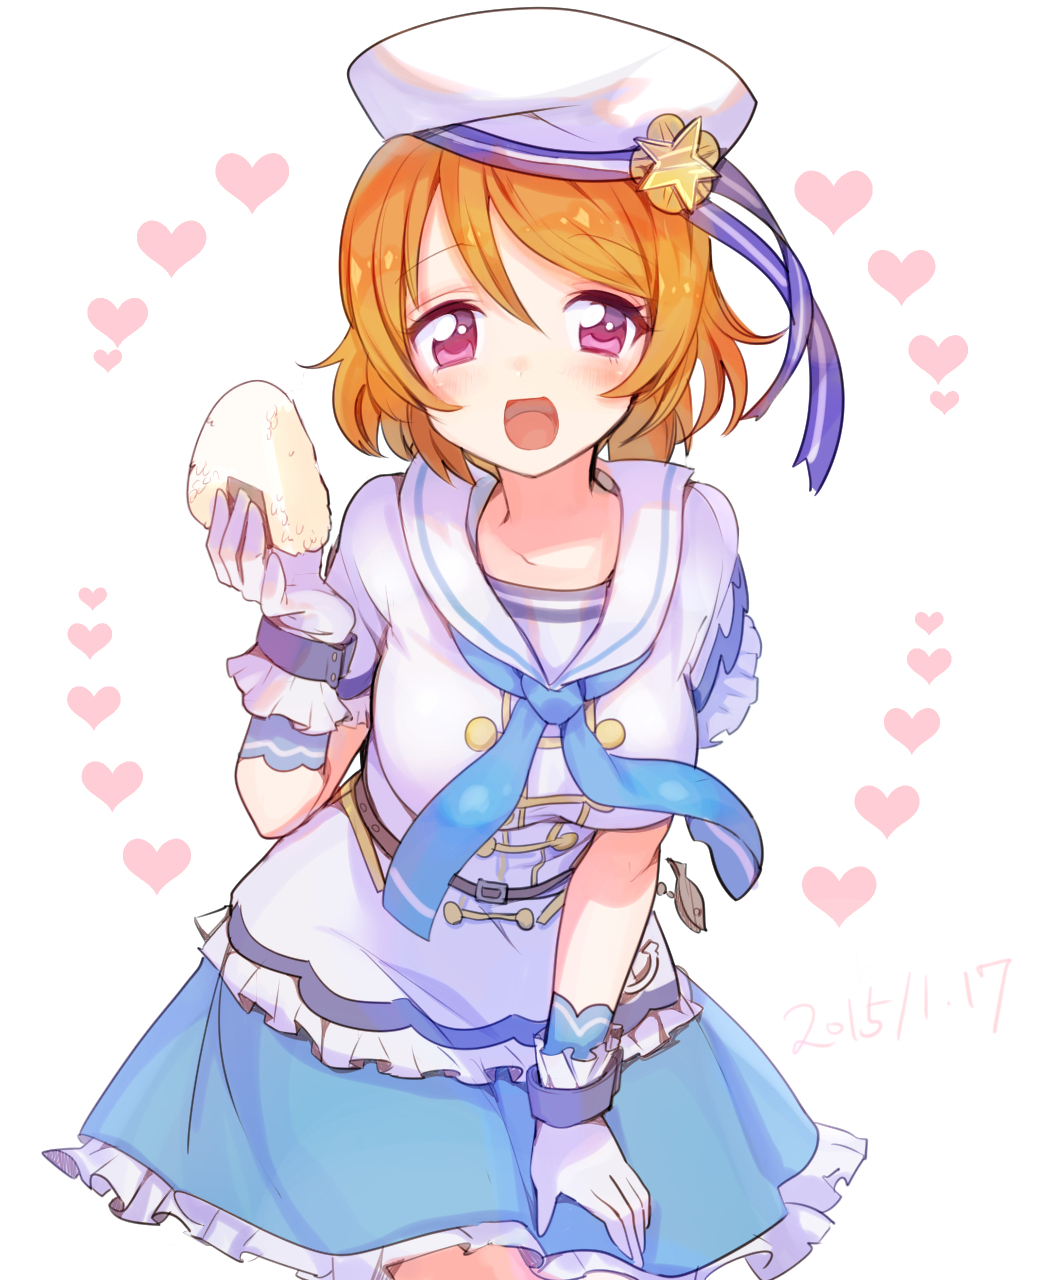 a_k_o blush brown_hair food gloves hat highres koizumi_hanayo looking_at_viewer love_live!_school_idol_project onigiri open_mouth short_hair skirt smile violet_eyes